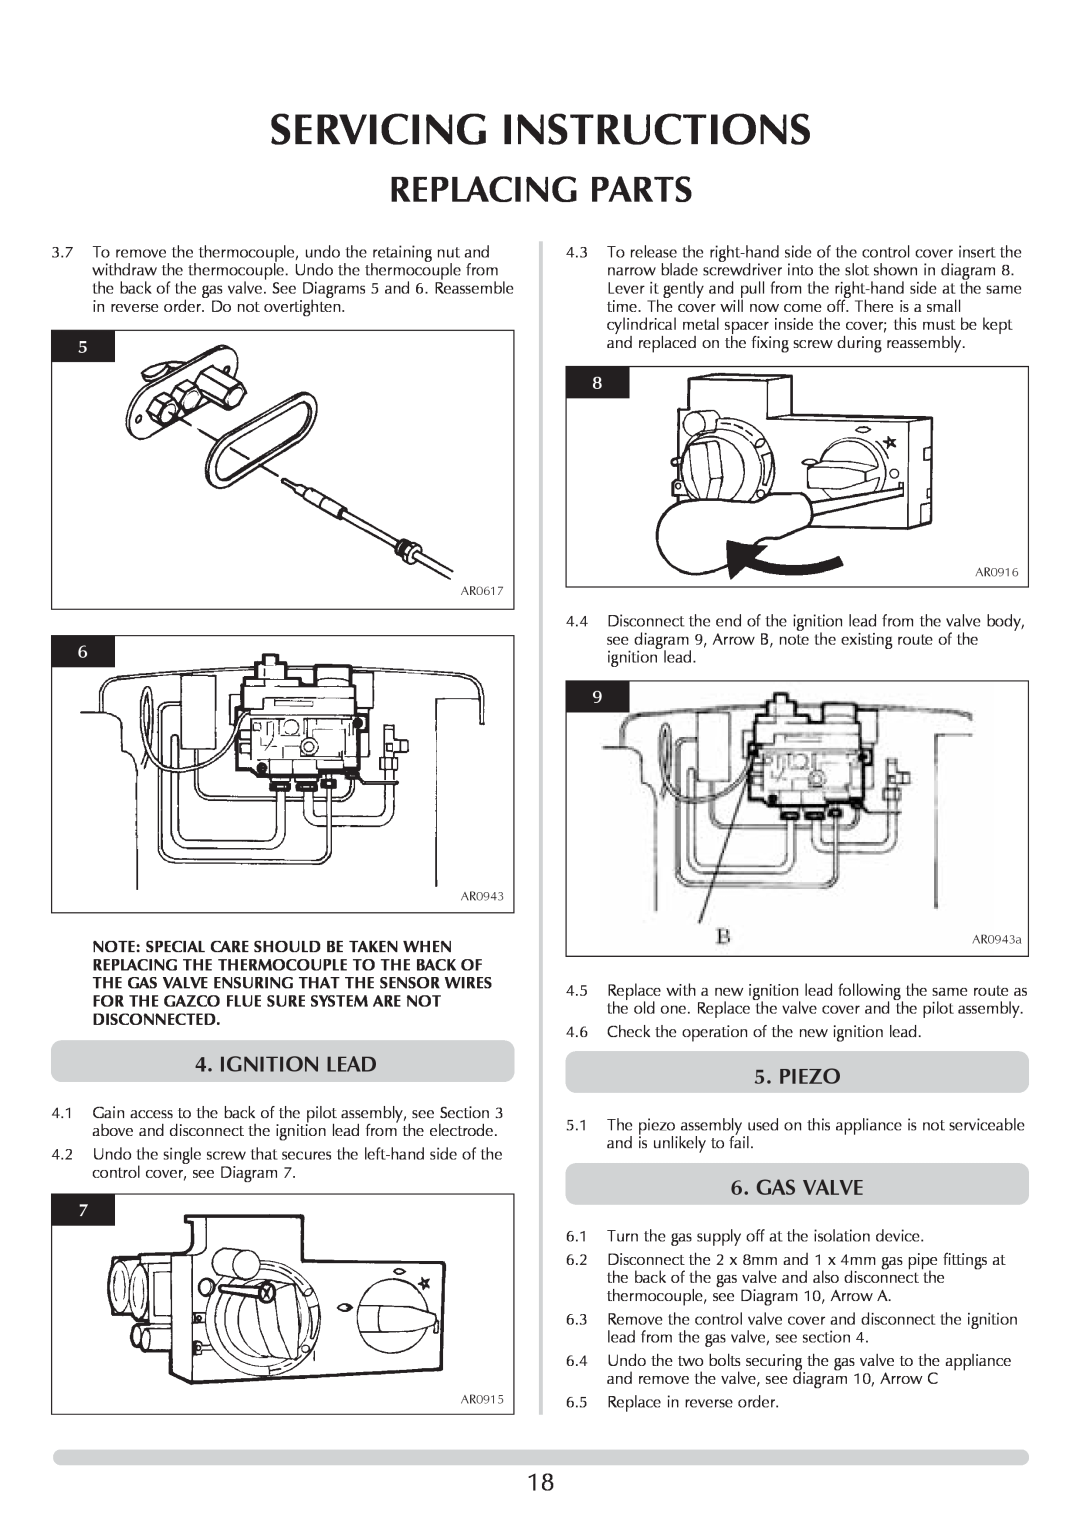 Stovax Stove Range manual Servicing Instructions, Replacing Parts, Ignition Lead, Piezo, Gas Valve 